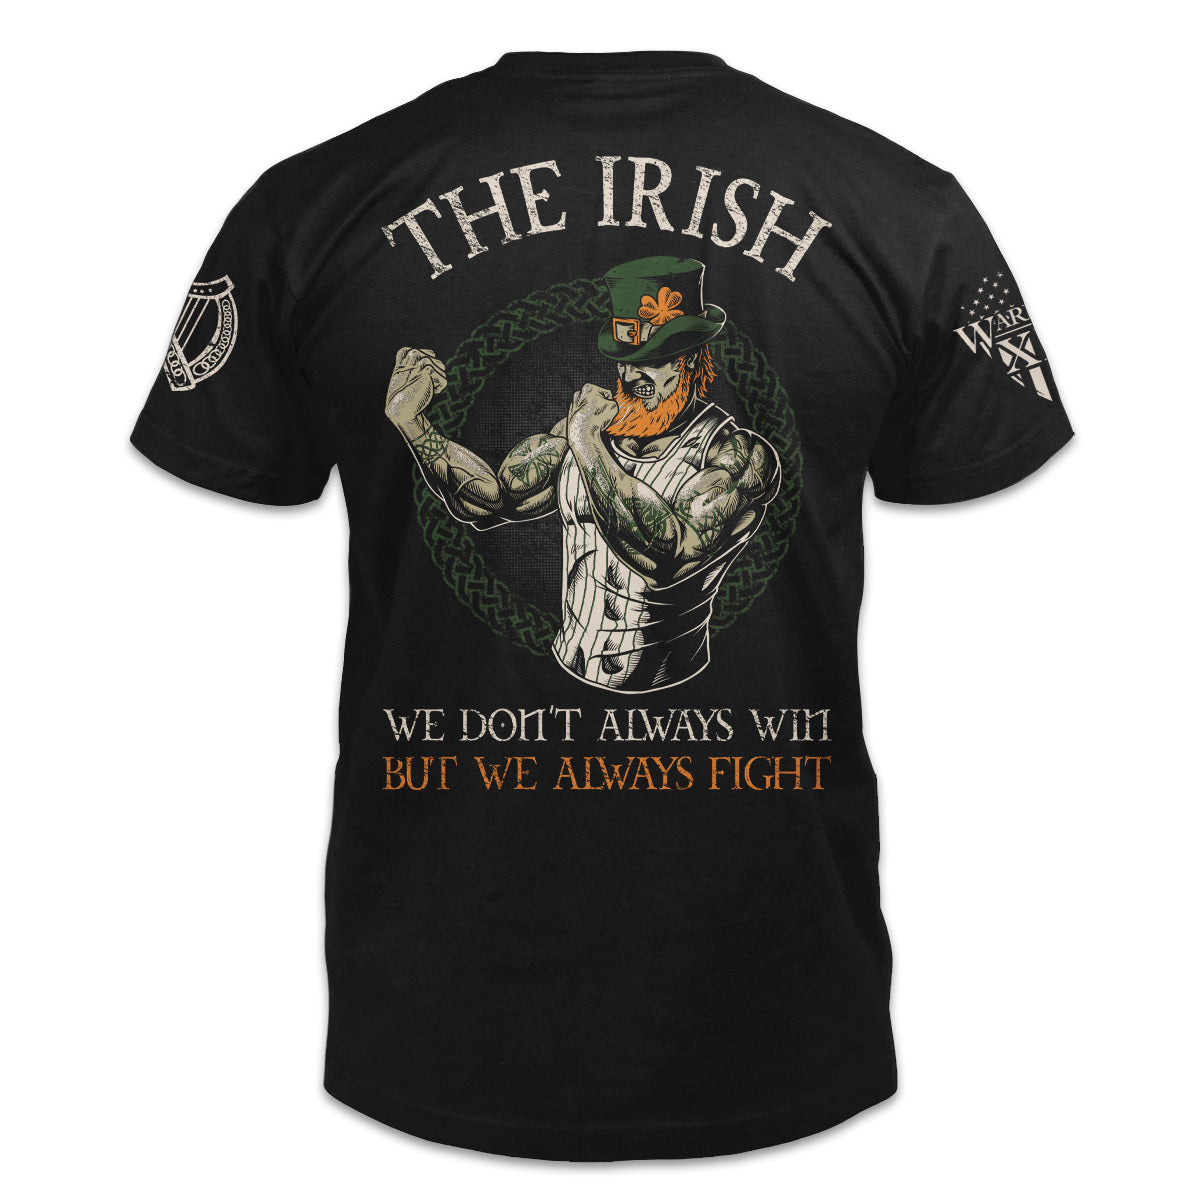 A black t-shirt with the words "The Irish - We don't always win, but we always fight" with an Irish man with his fists up printed on the back of the shirt.